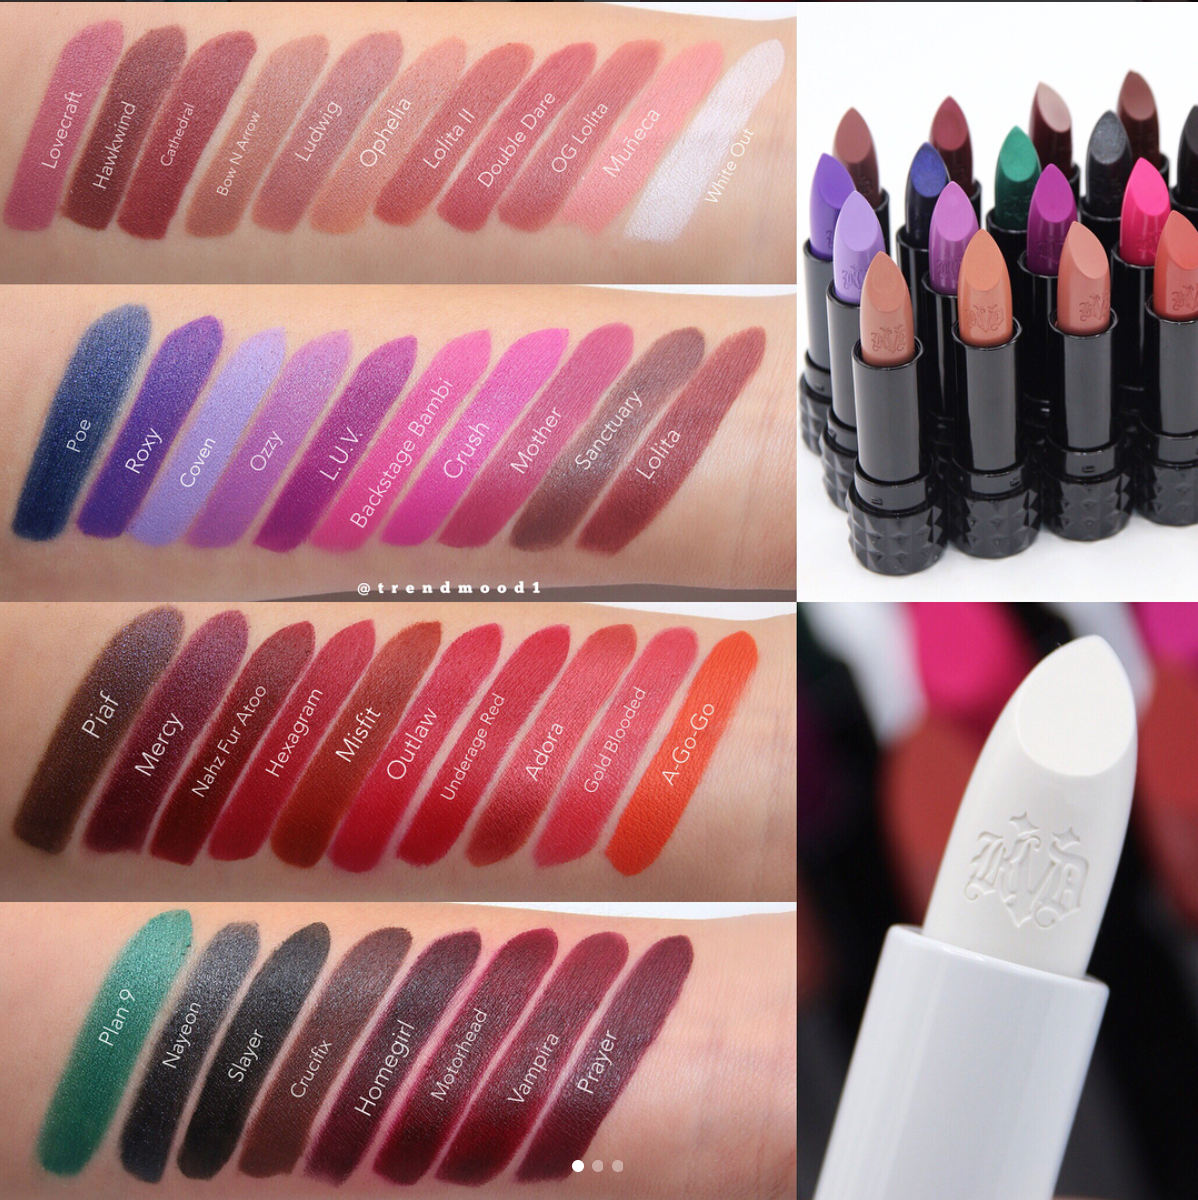 Kat Von D Beauty Studded Kiss Lipstick Creme Swatches, Review and Release Date